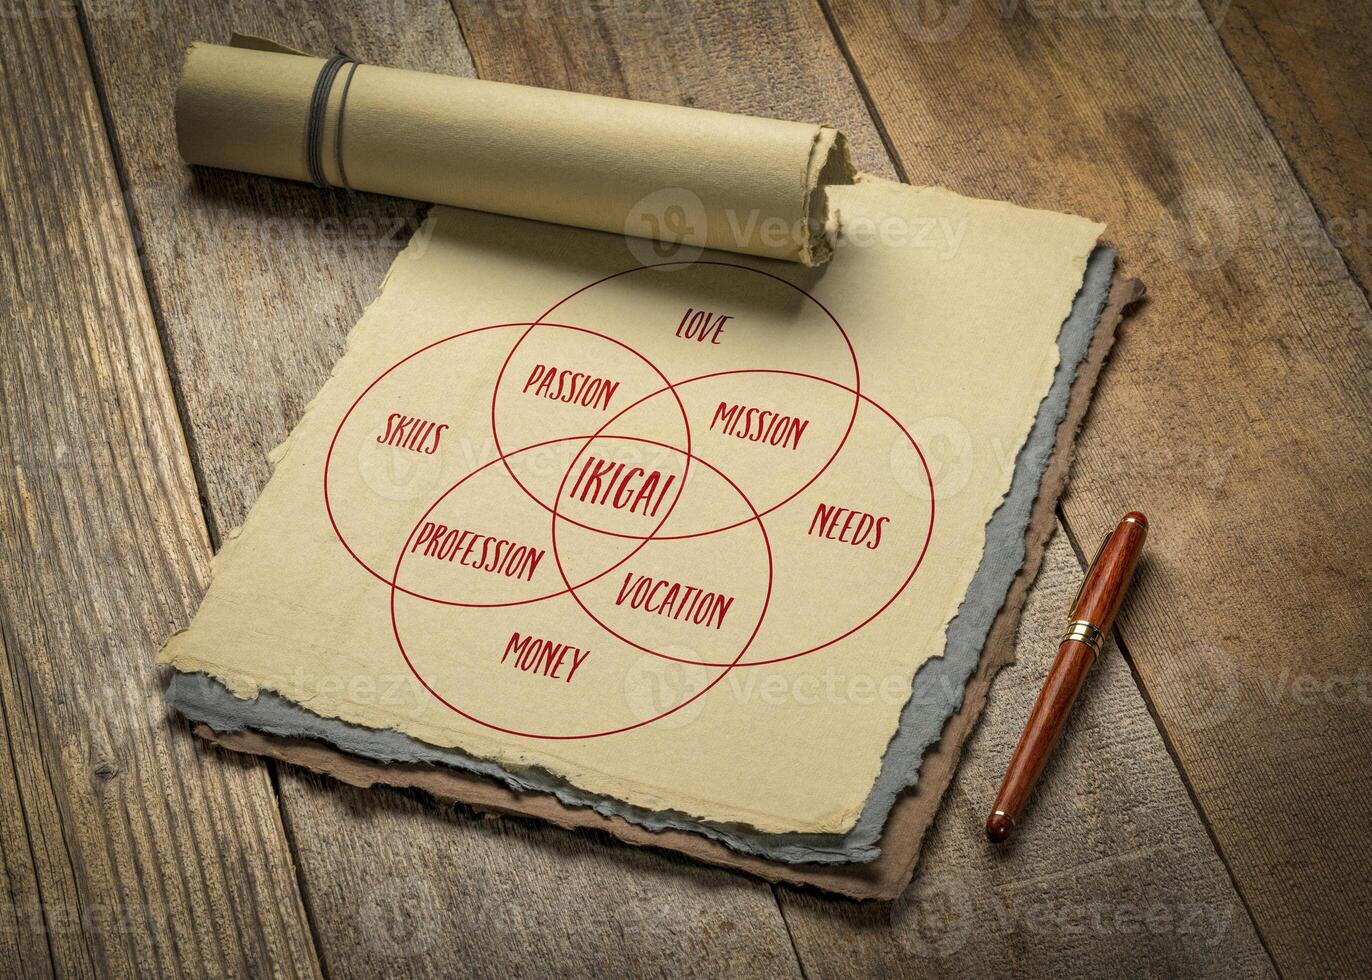 ikigai - interpretation of Japanese lifestyle concept  - a reason for being as a balance between love, skills, needs and money - a diagram on art paper photo